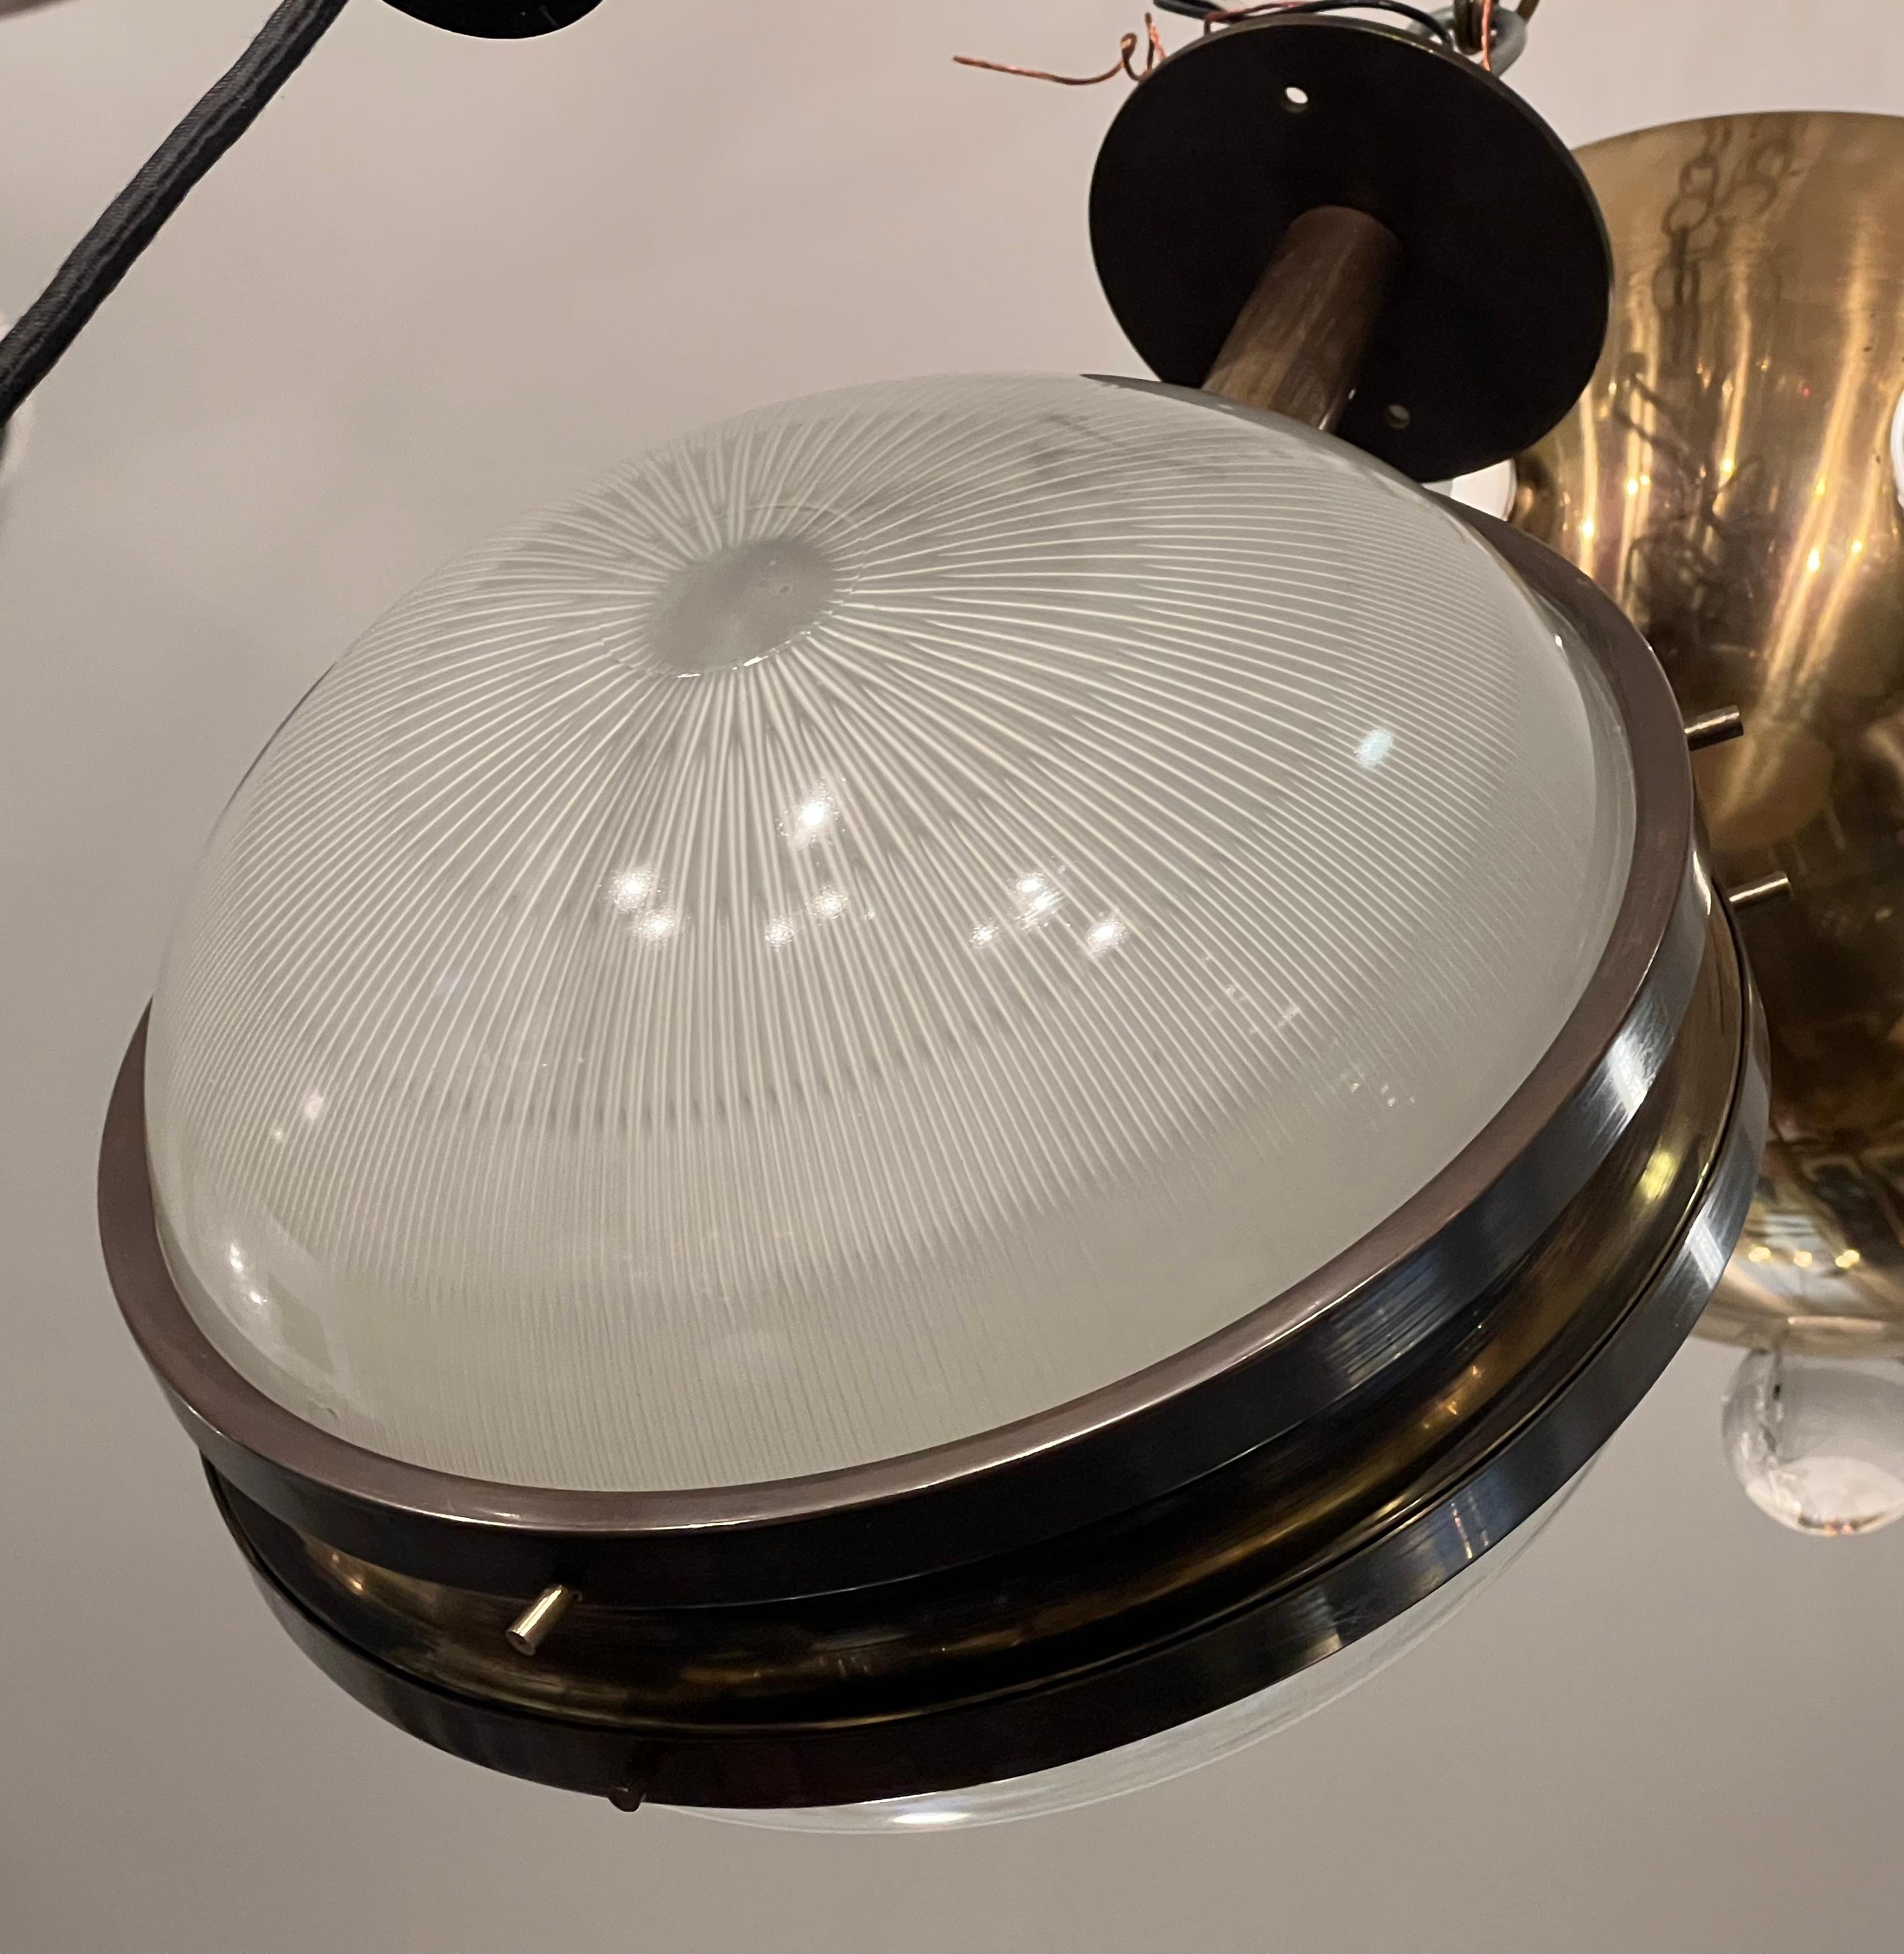 An original Gamma ceiling or wall lamp in dark aged brass by Sergio Mazza for Artemide. 1960. Can match up a pair if needed.